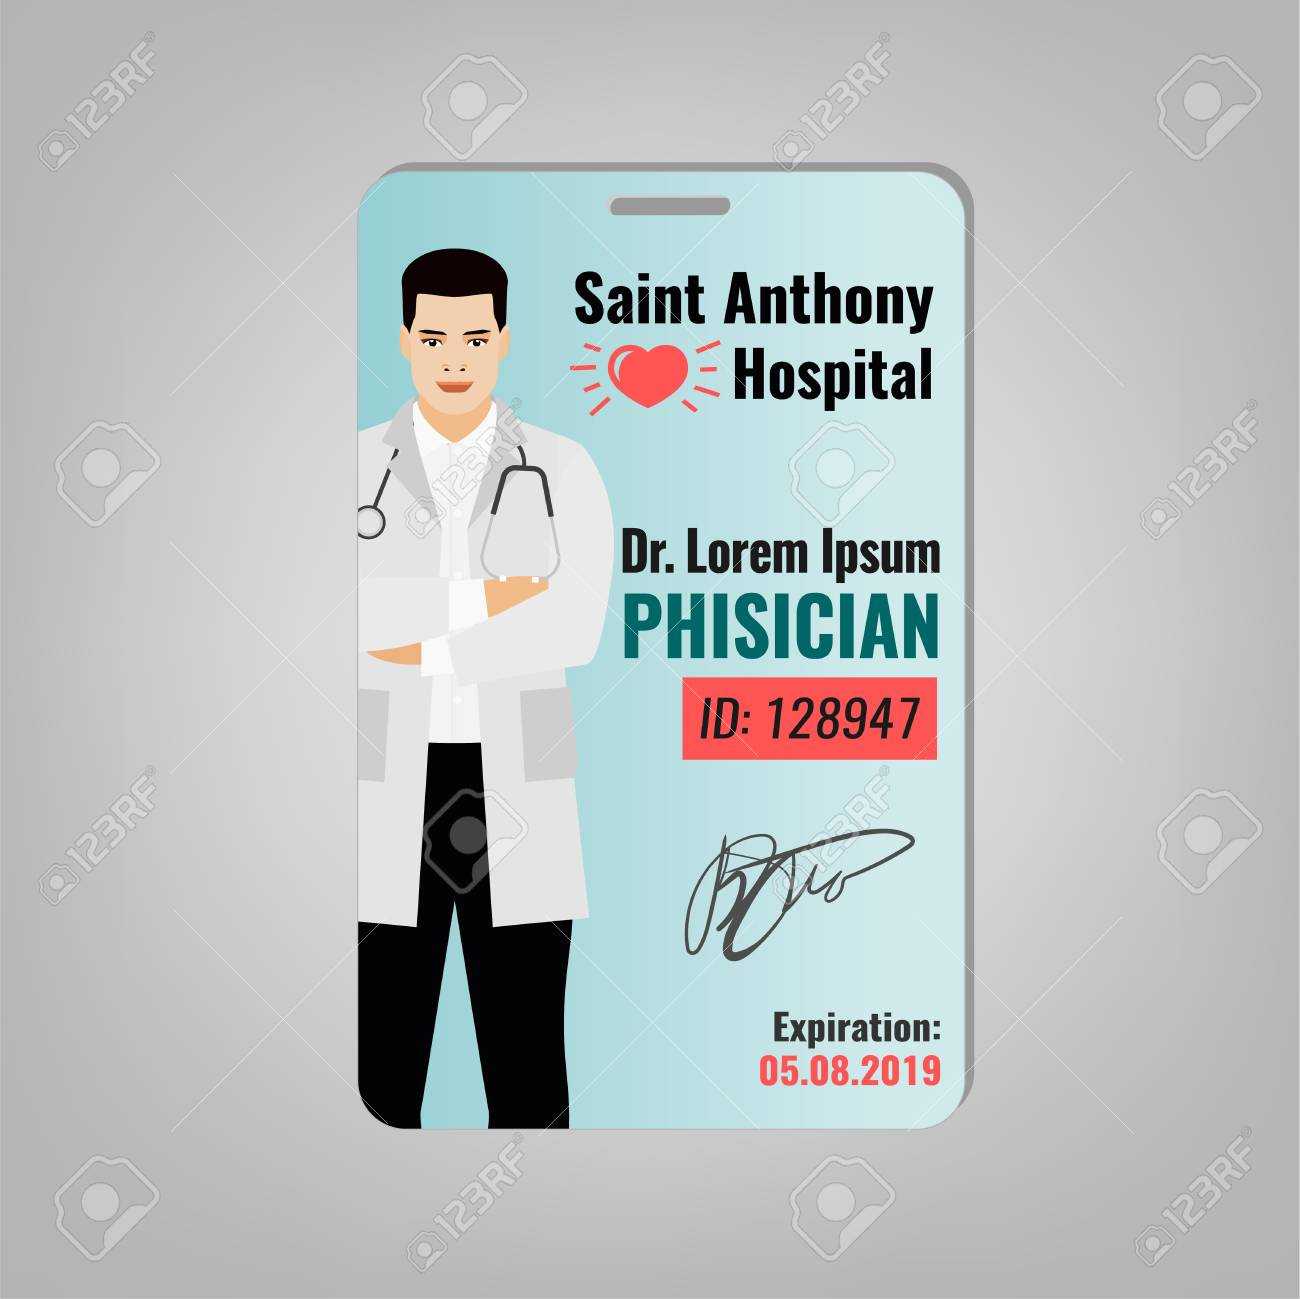 Doctors Id Card With Hospital Logo And Phisician Image. Medical.. Regarding Hospital Id Card Template